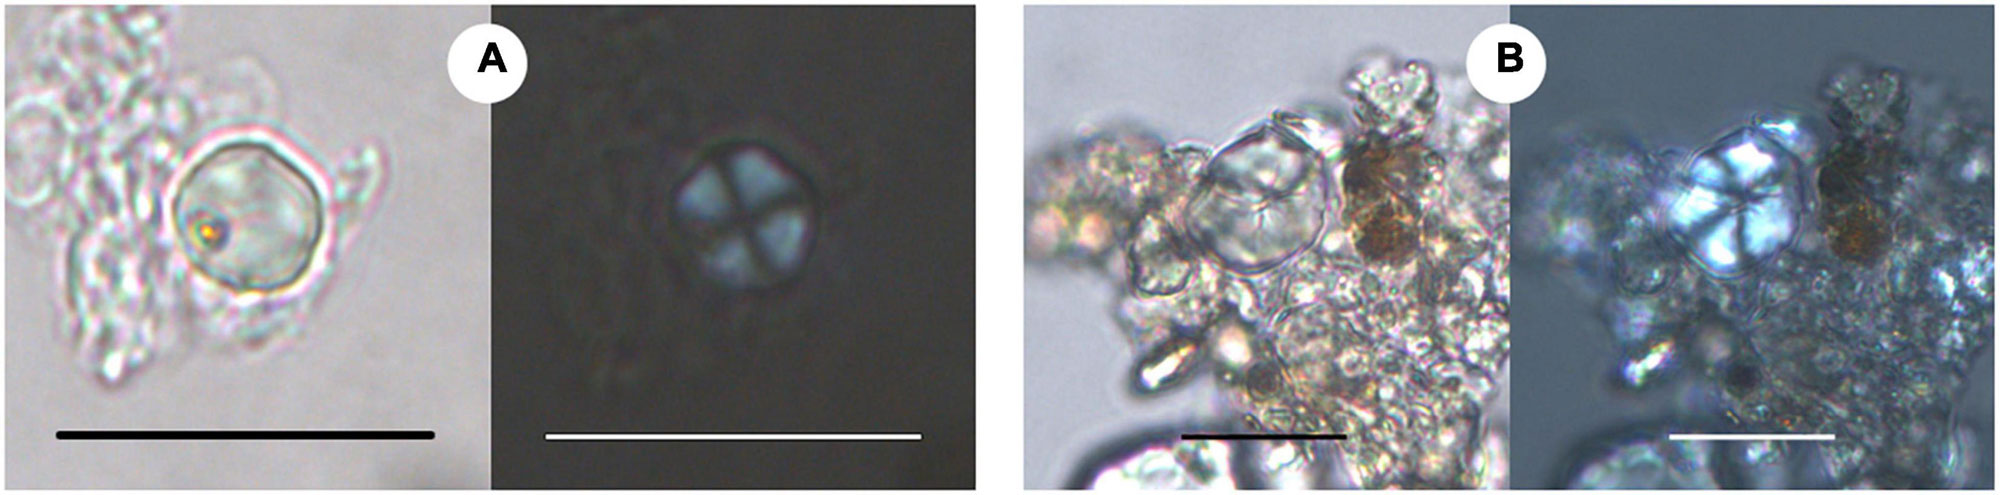 Four-panel image showing photomicrographs of ancient starch grains recovered from pottery found at archaeological sites in Gujarat, India, dating between about 3300 and 2000 years B.C. Each pair of images shows the grains under brightfield illumination (regular transmitted light) and cross-polarized light (showing the extinction cross). Left panels show starch from millet (Millet Tribe/Tribe Paniceae), right panels show starch from Job's tears (Coix lachyrma-jobi).